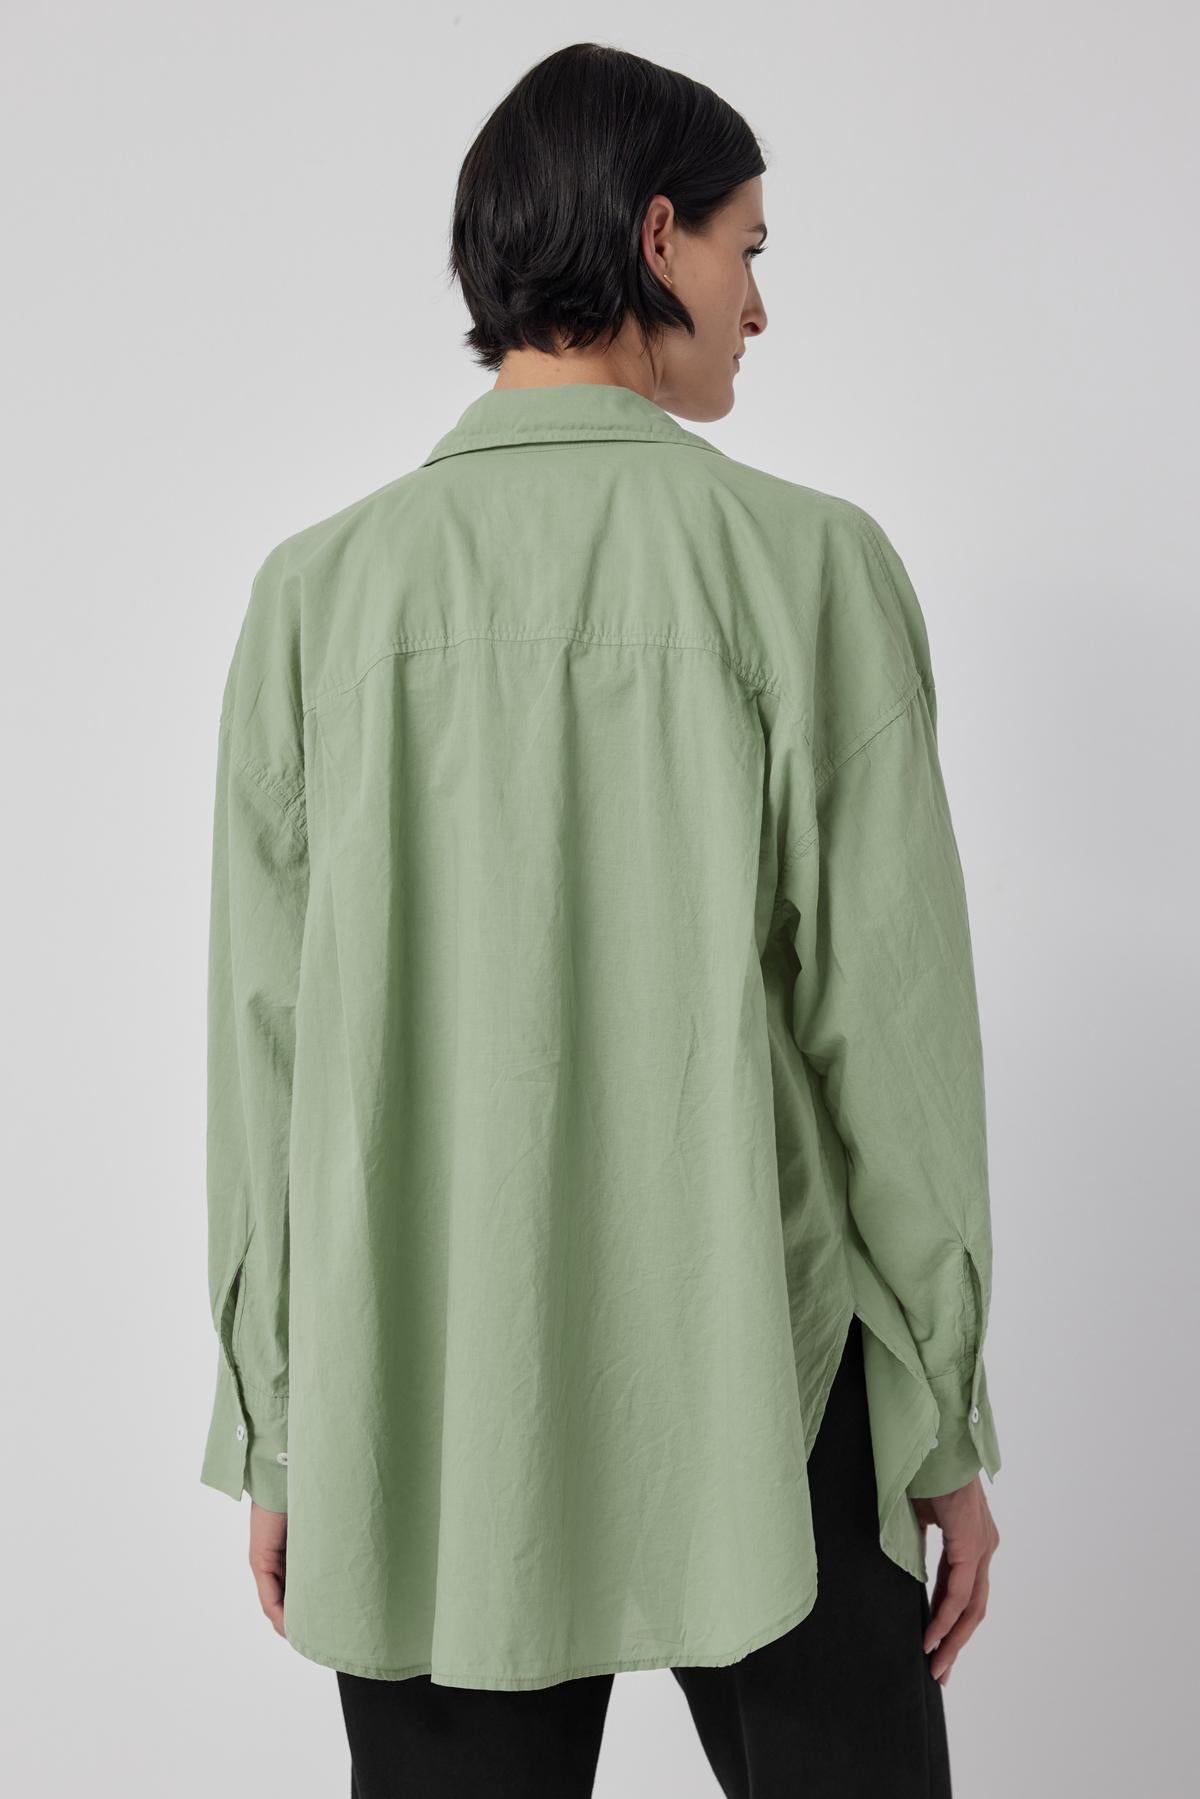 The back view of a woman wearing an oversized green cotton REDONDO BUTTON-UP SHIRT by Velvet by Jenny Graham with drop shoulder.-36198180094145